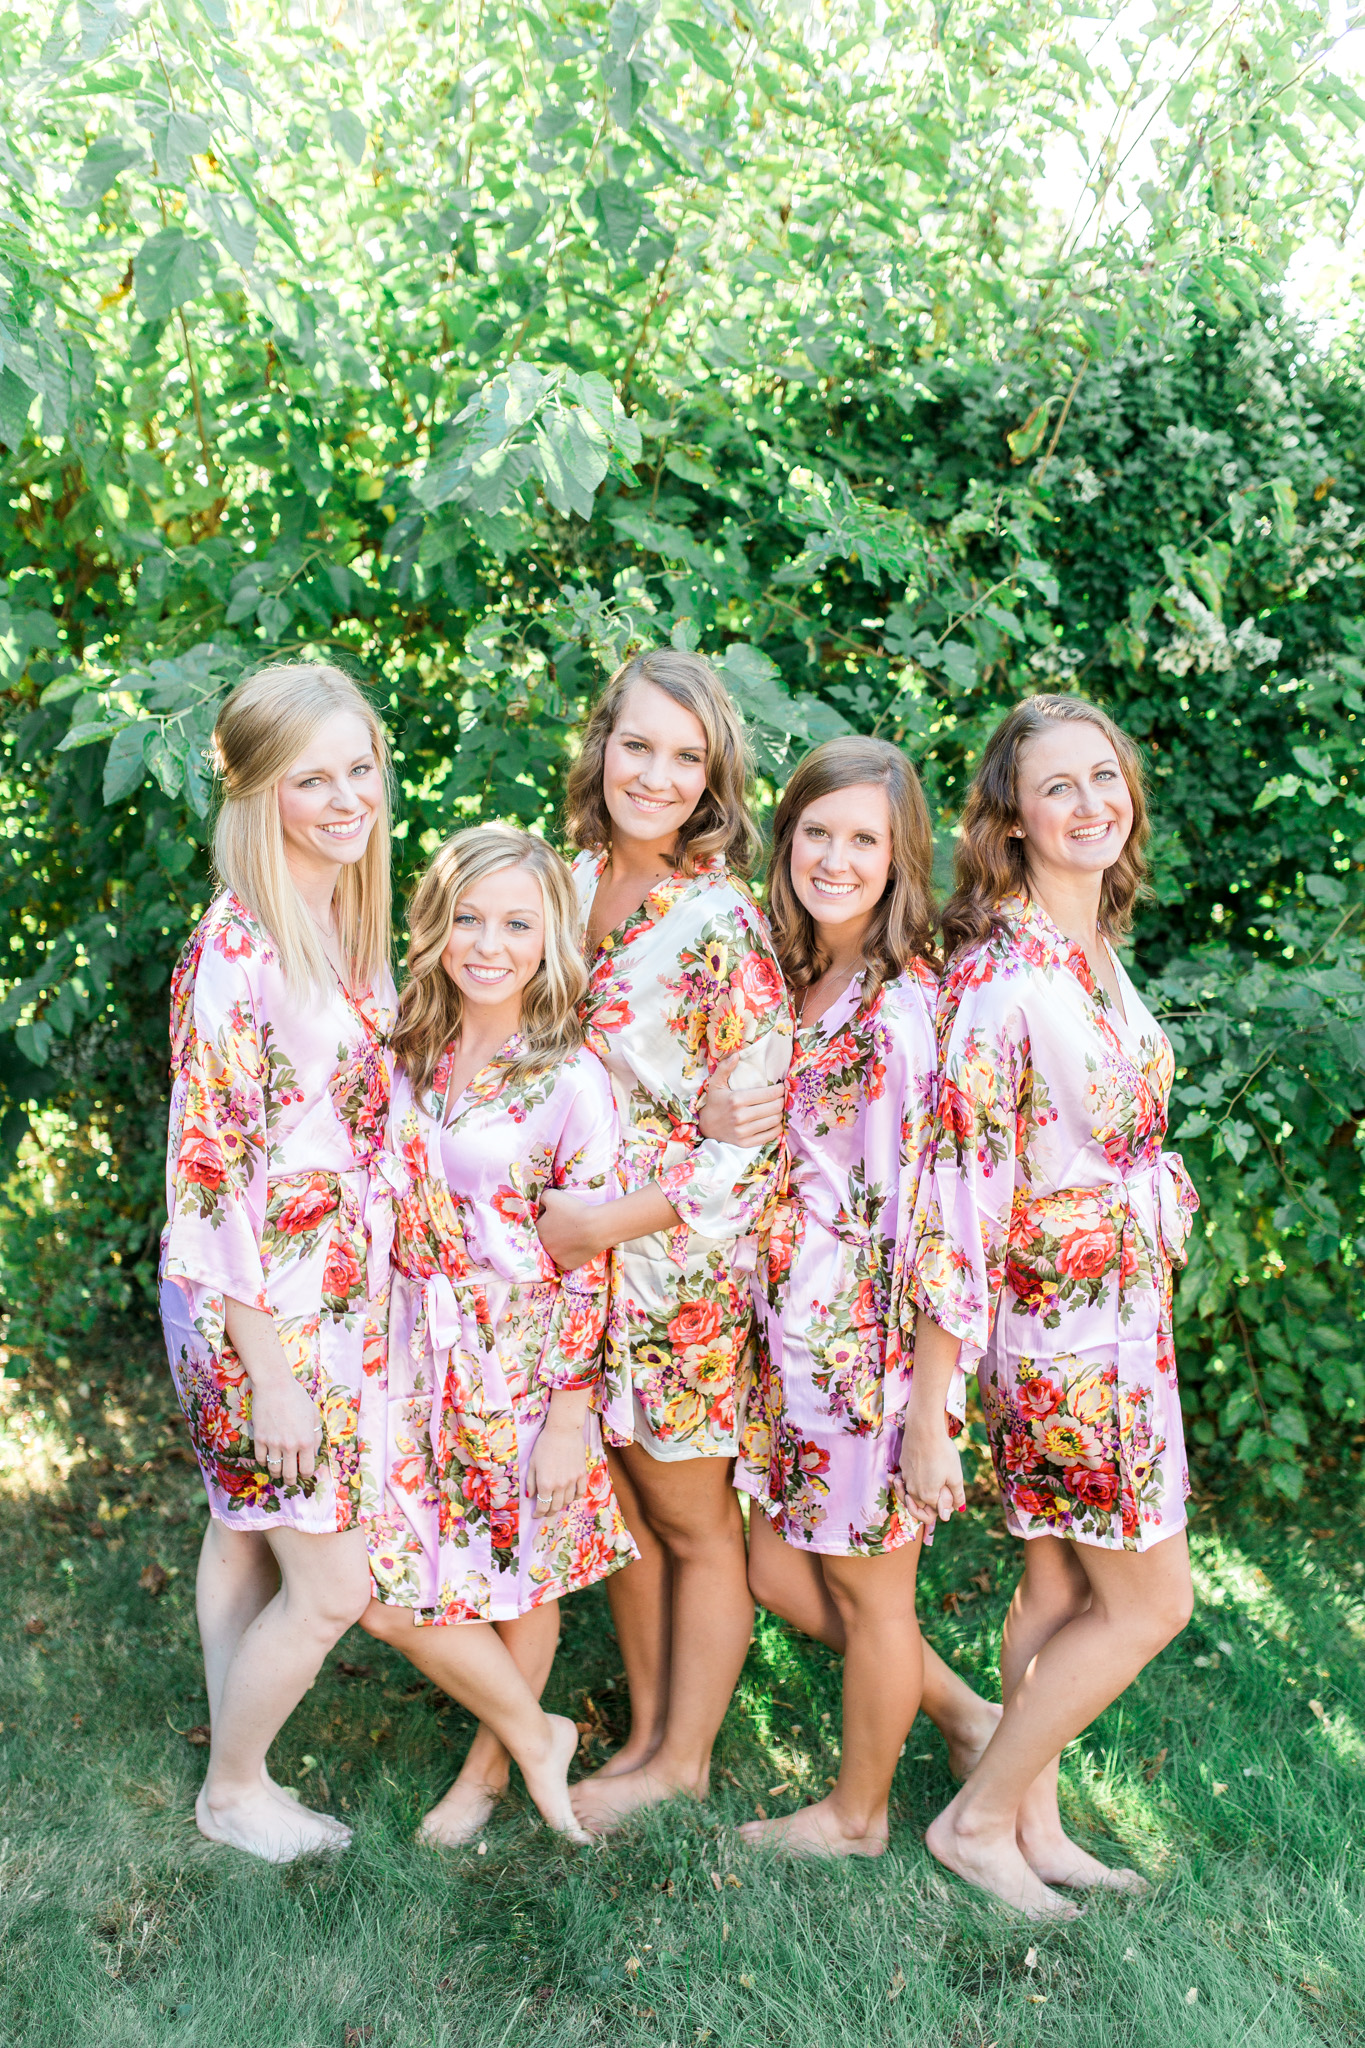 Best friends | Spa Day with Bridal Party | Natural Beauty Products | Floral Robes | Girls Night | Giveaway!